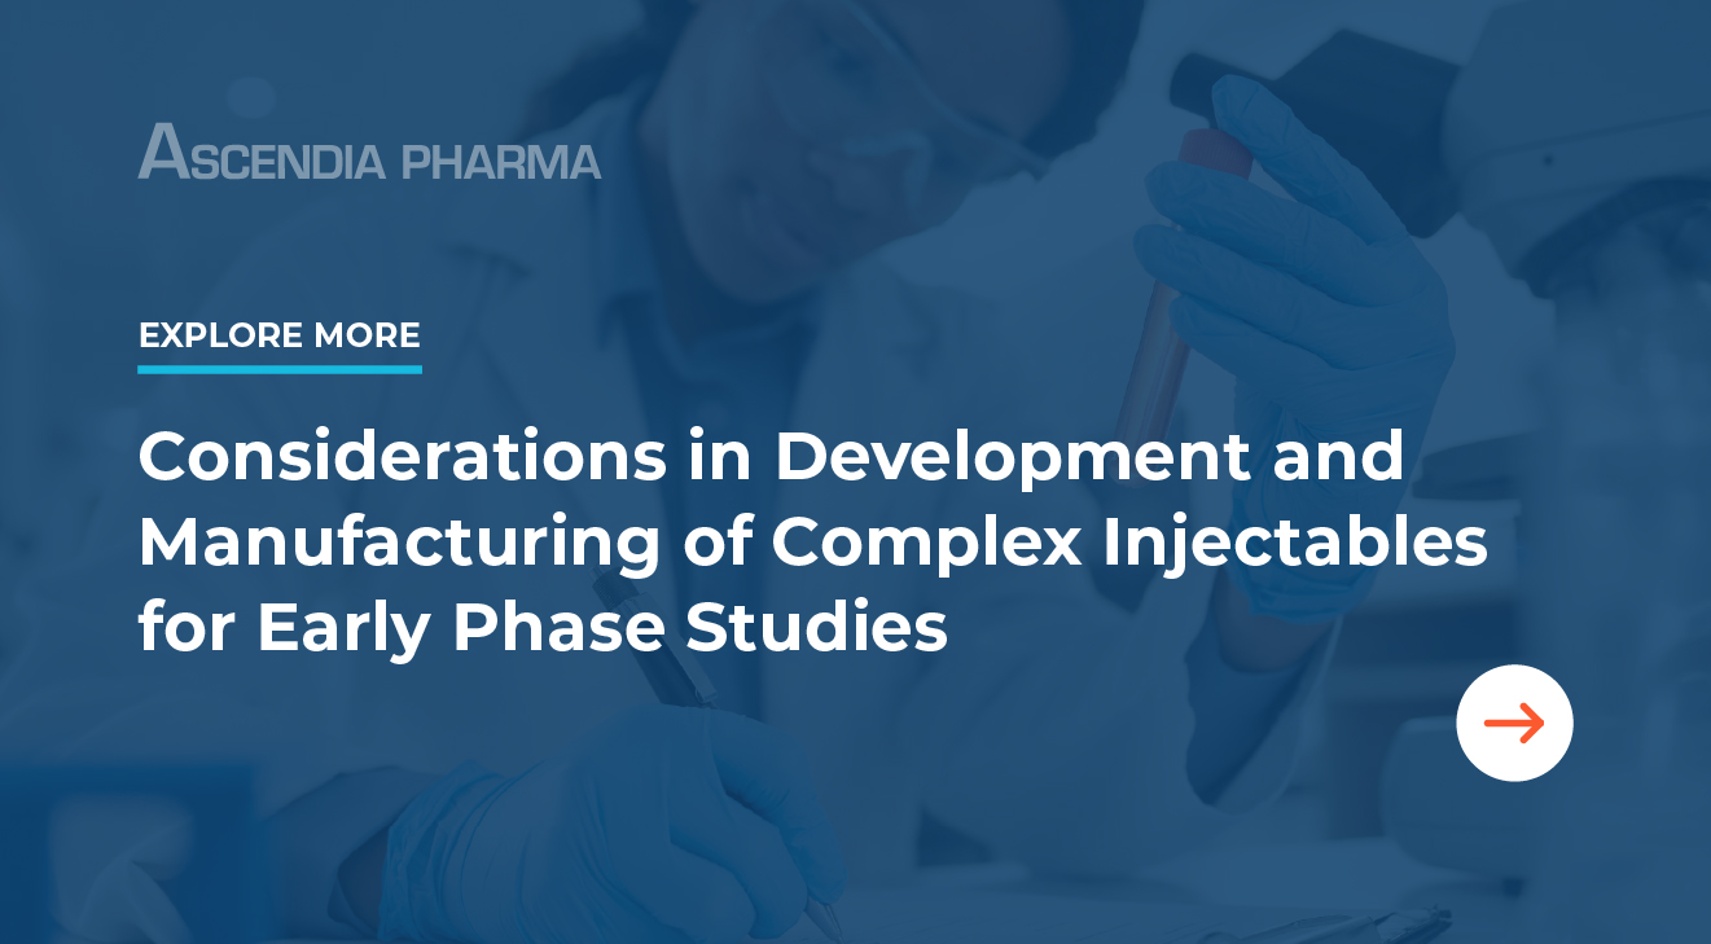 Considerations in Development and Manufacturing of Complex Injectables for Early Phase Stuies